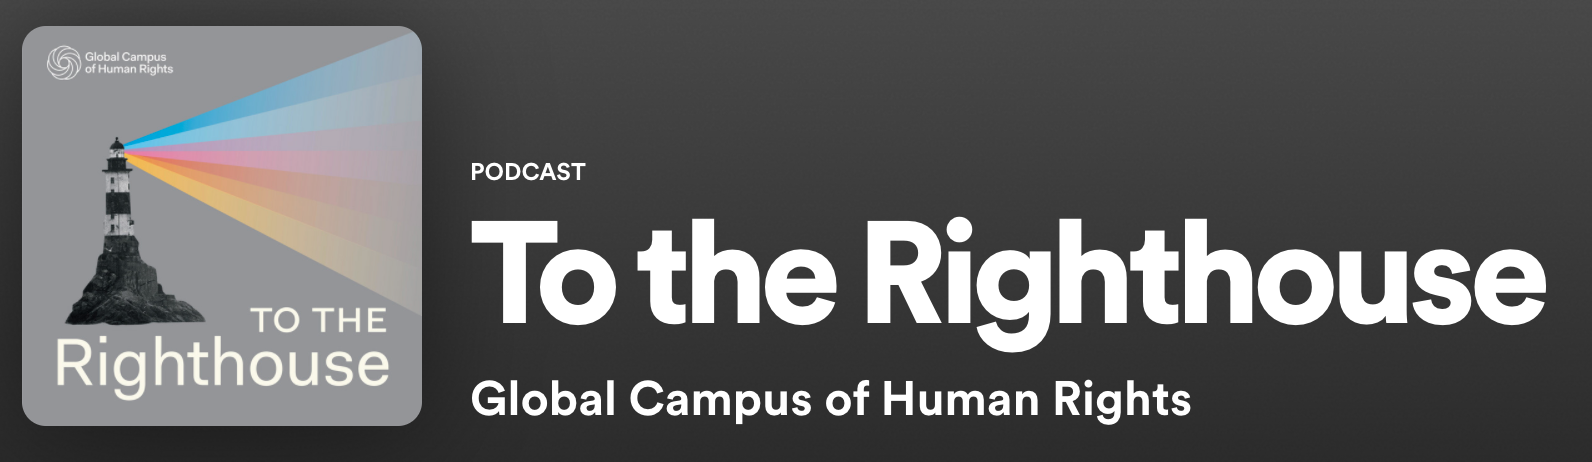 To The Righthouse Podcast, Global Campus of Human Rights